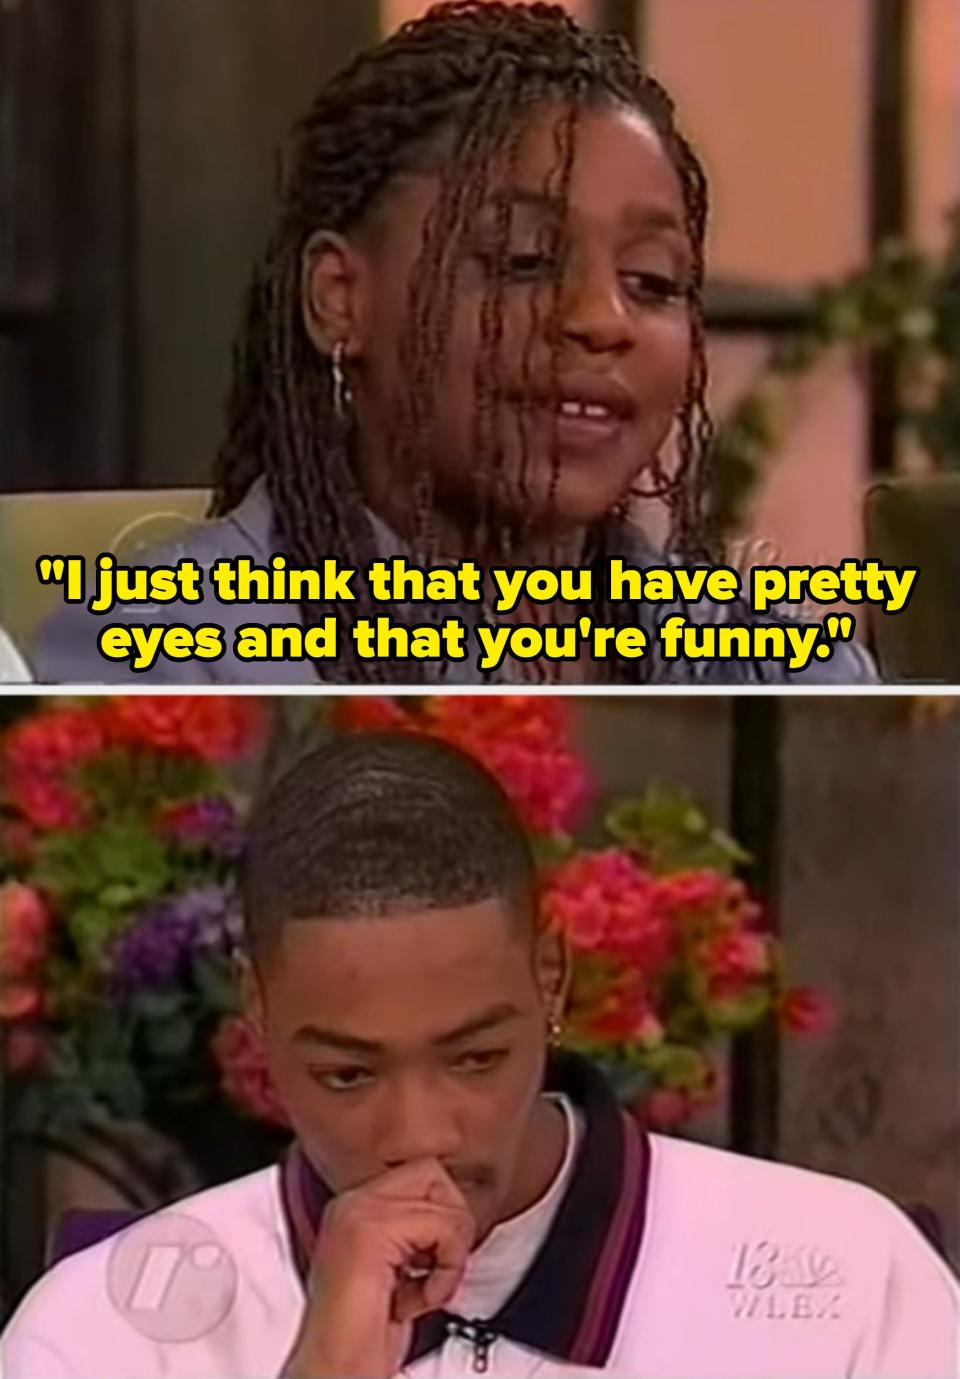 "I just think that you have pretty eyes and that you're funny."